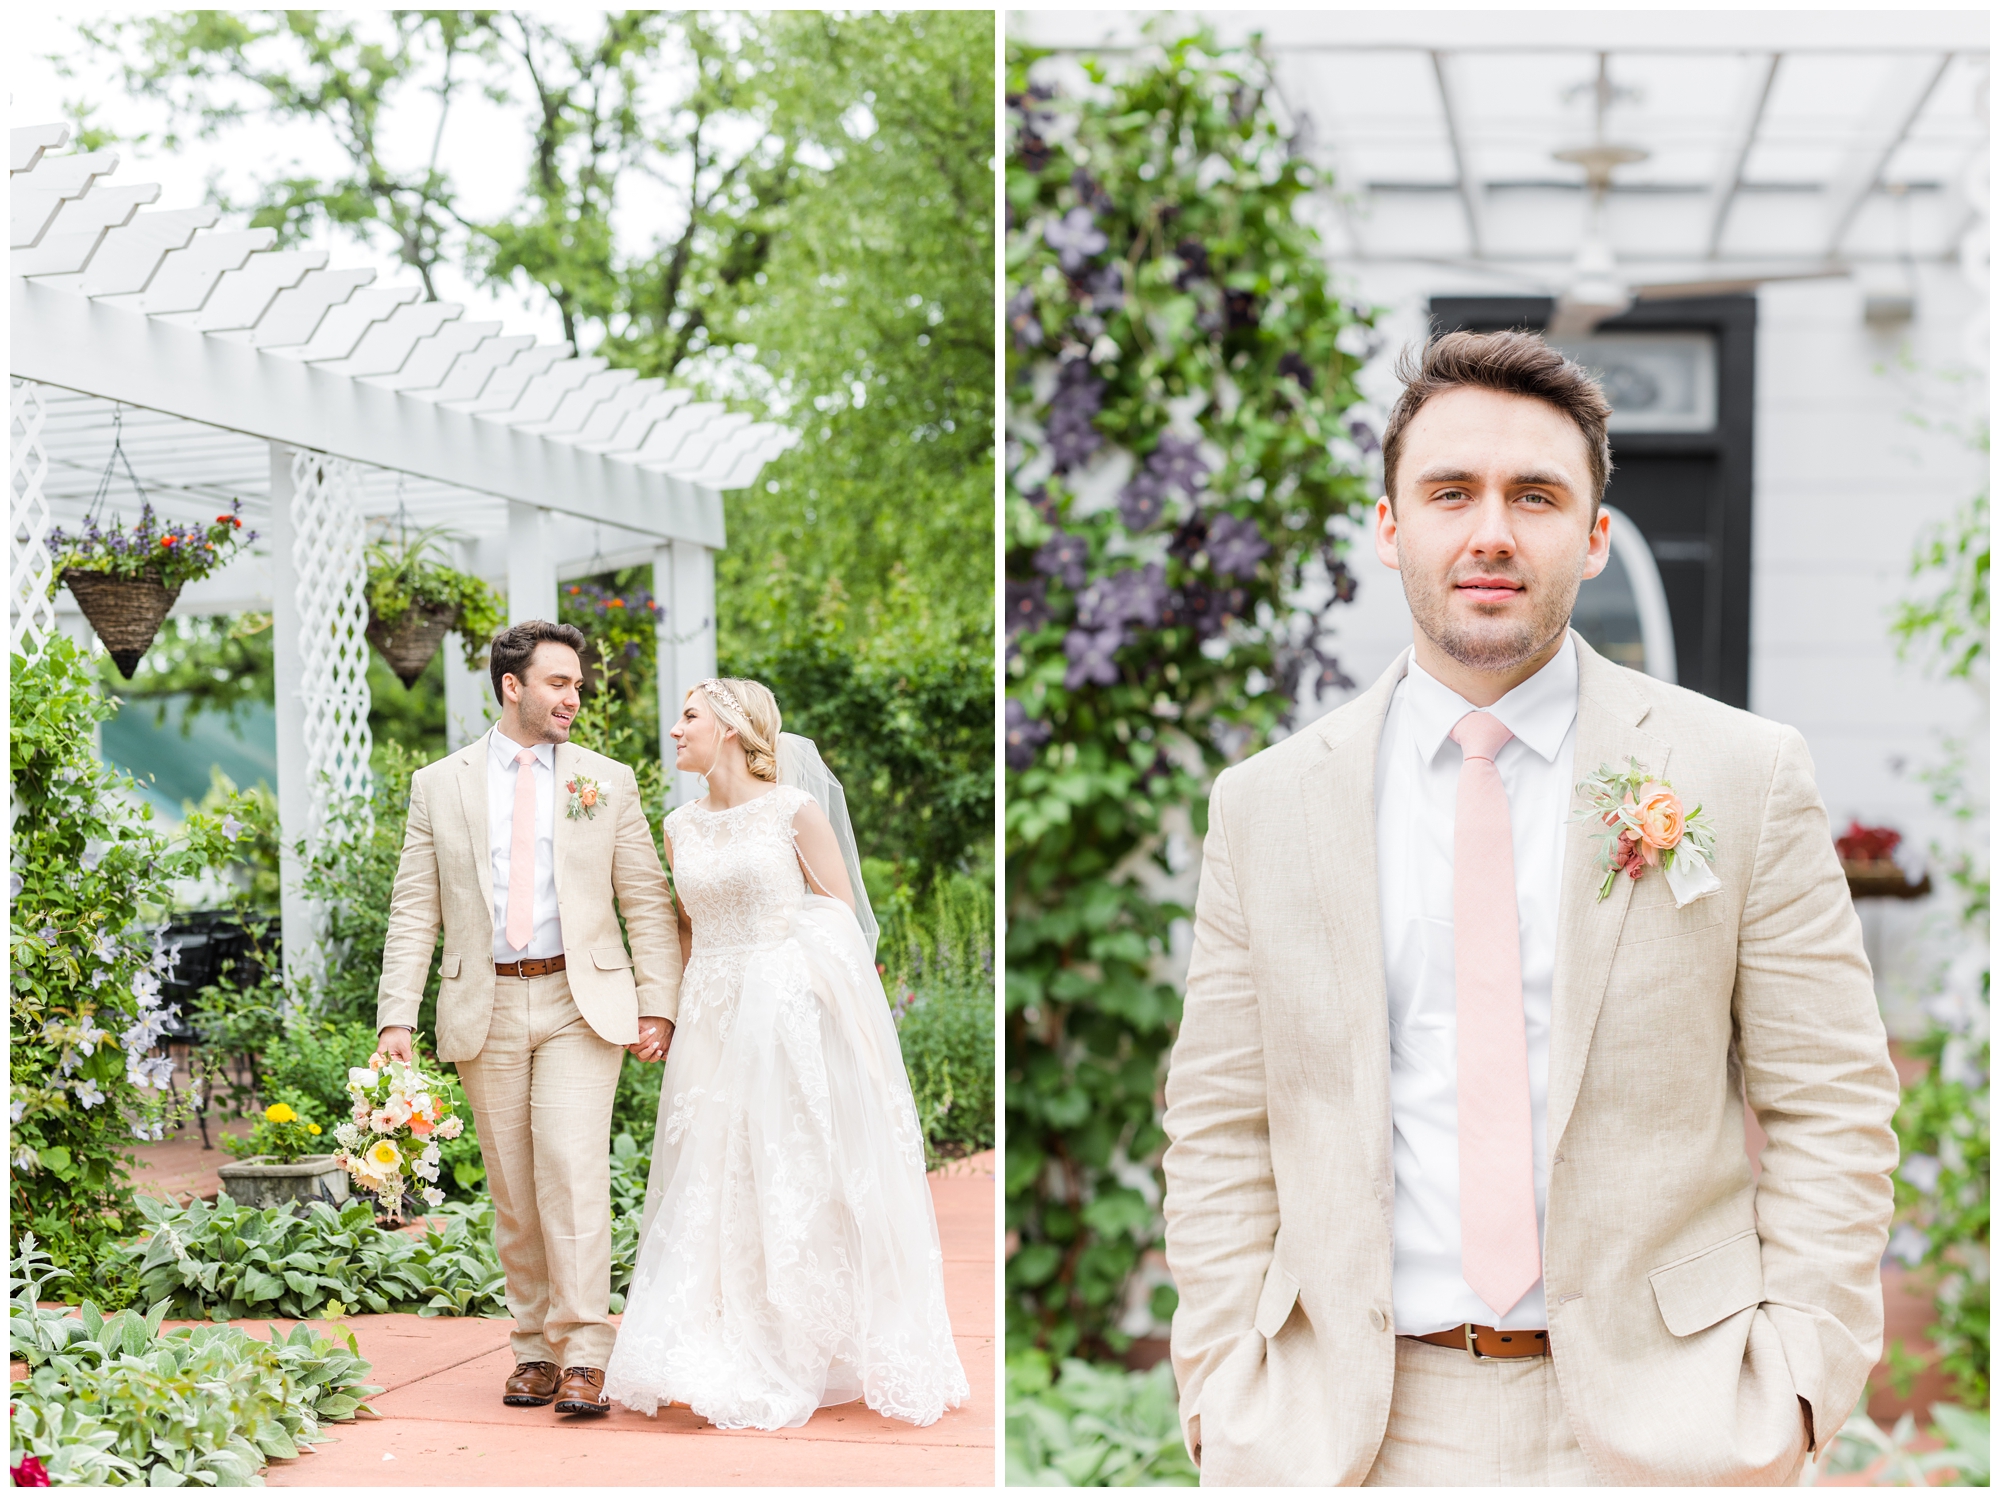 The groom poses in his tan linen suit. He is wearing a pale pink tie with a boutonniere (orange and white flowers plus greenery) tied with a pink ribbon.  He also poses with his bride. She is holding her gown in her hand and looking at him as they walk. 